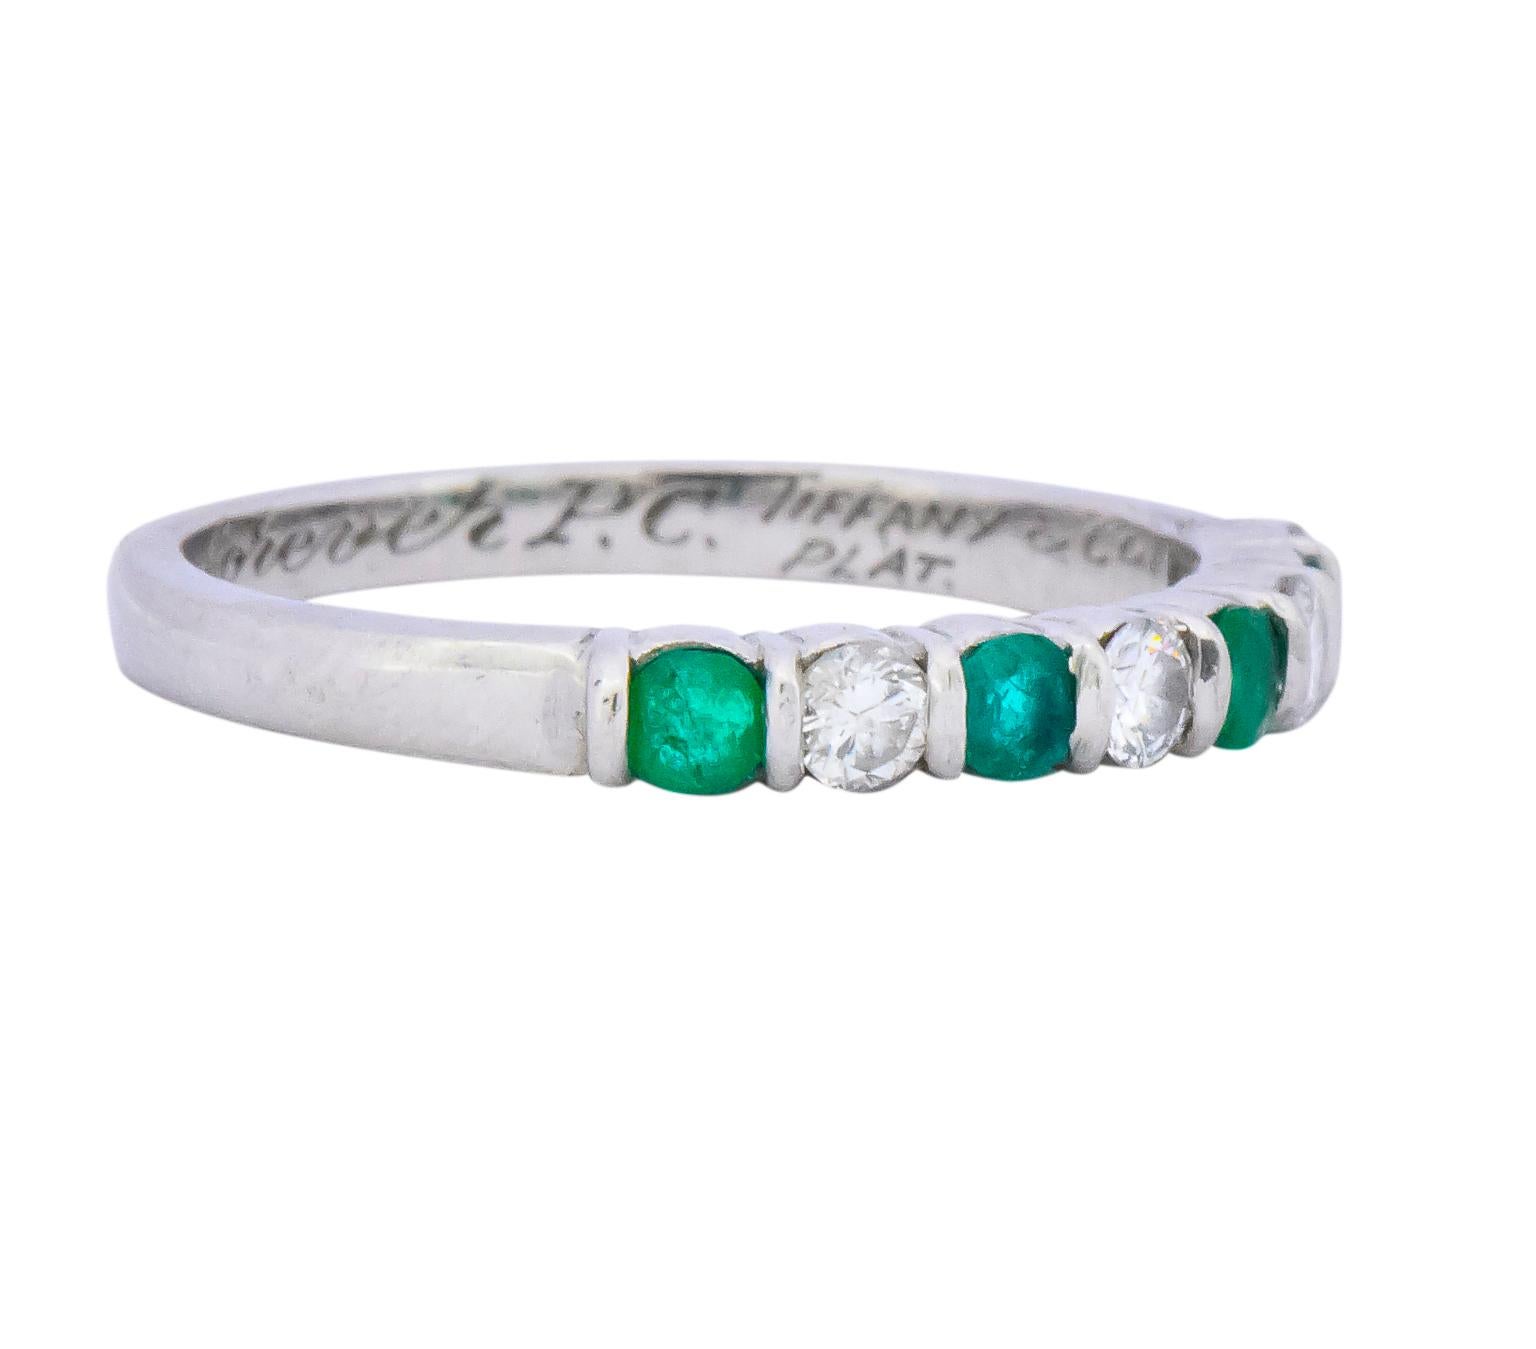 Set to the front with alternating bar set emeralds and round brilliant cut diamonds weighing approximately 0.24 carat total

Emeralds are translucent with a vivid green color and the round brilliant diamonds are G/H color and VS clarity

Inner shank